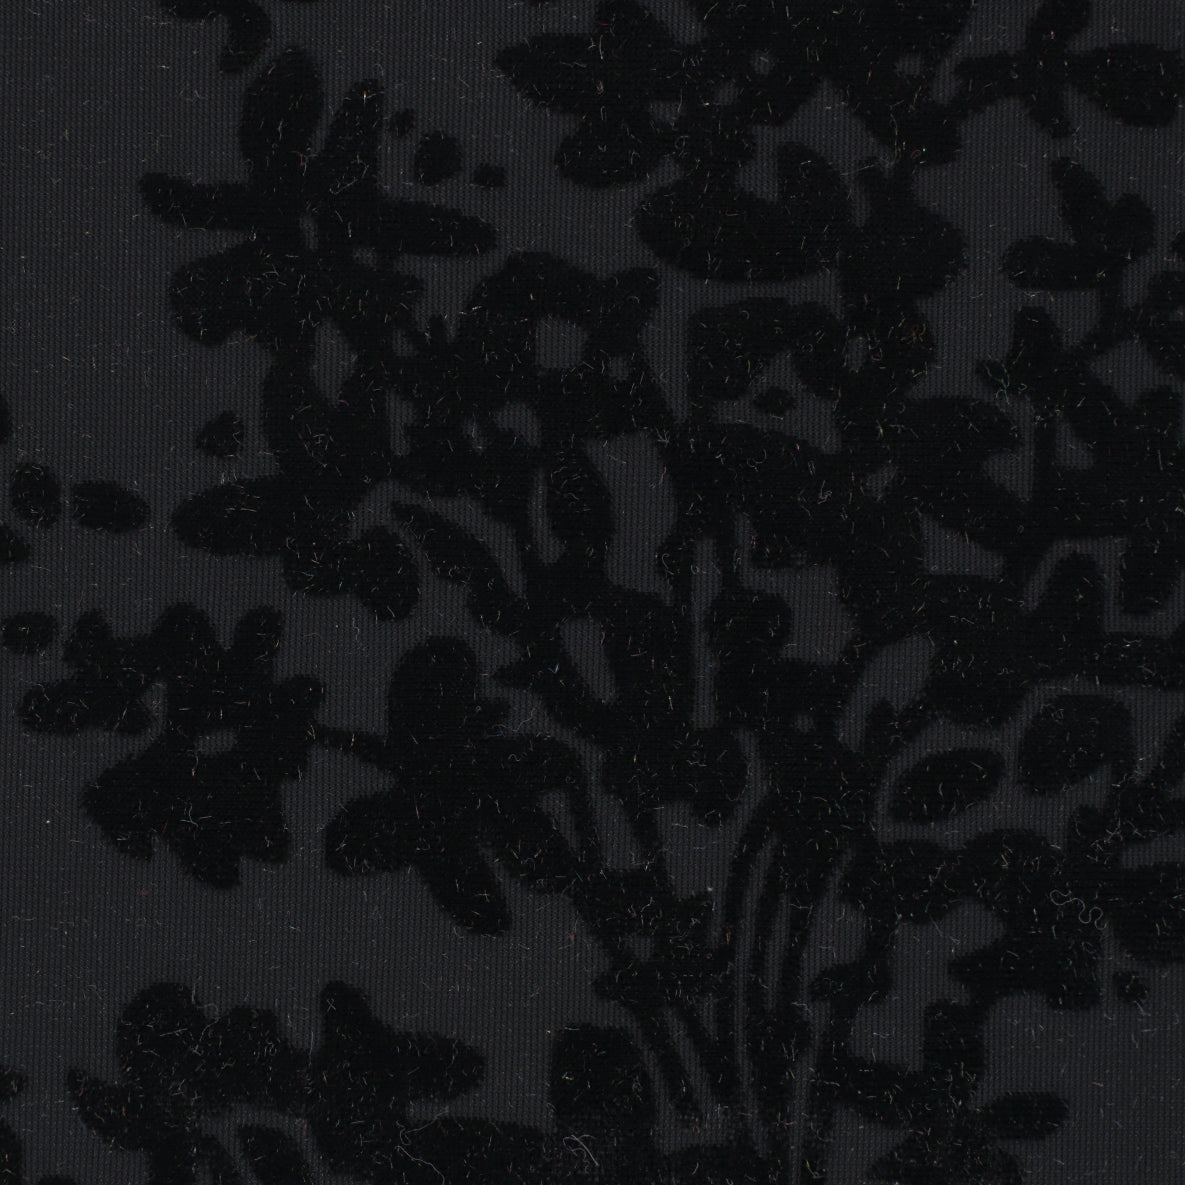 17003-03 Black Branches Burn-Out Ice Velvet Plain Dyed Blend abstract black blend burn-out ice knit nylon pattern plain dyed polyester spandex velvet Burn-Out, Velvet - knit fabric - woven fabric - fabric company - fabric wholesale - fabric b2b - fabric factory - high quality fabric - hong kong fabric - fabric hk - acetate fabric - cotton fabric - linen fabric - metallic fabric - nylon fabric - polyester fabric - spandex fabric - chun wing hing - cwh hk - fabric worldwide ship